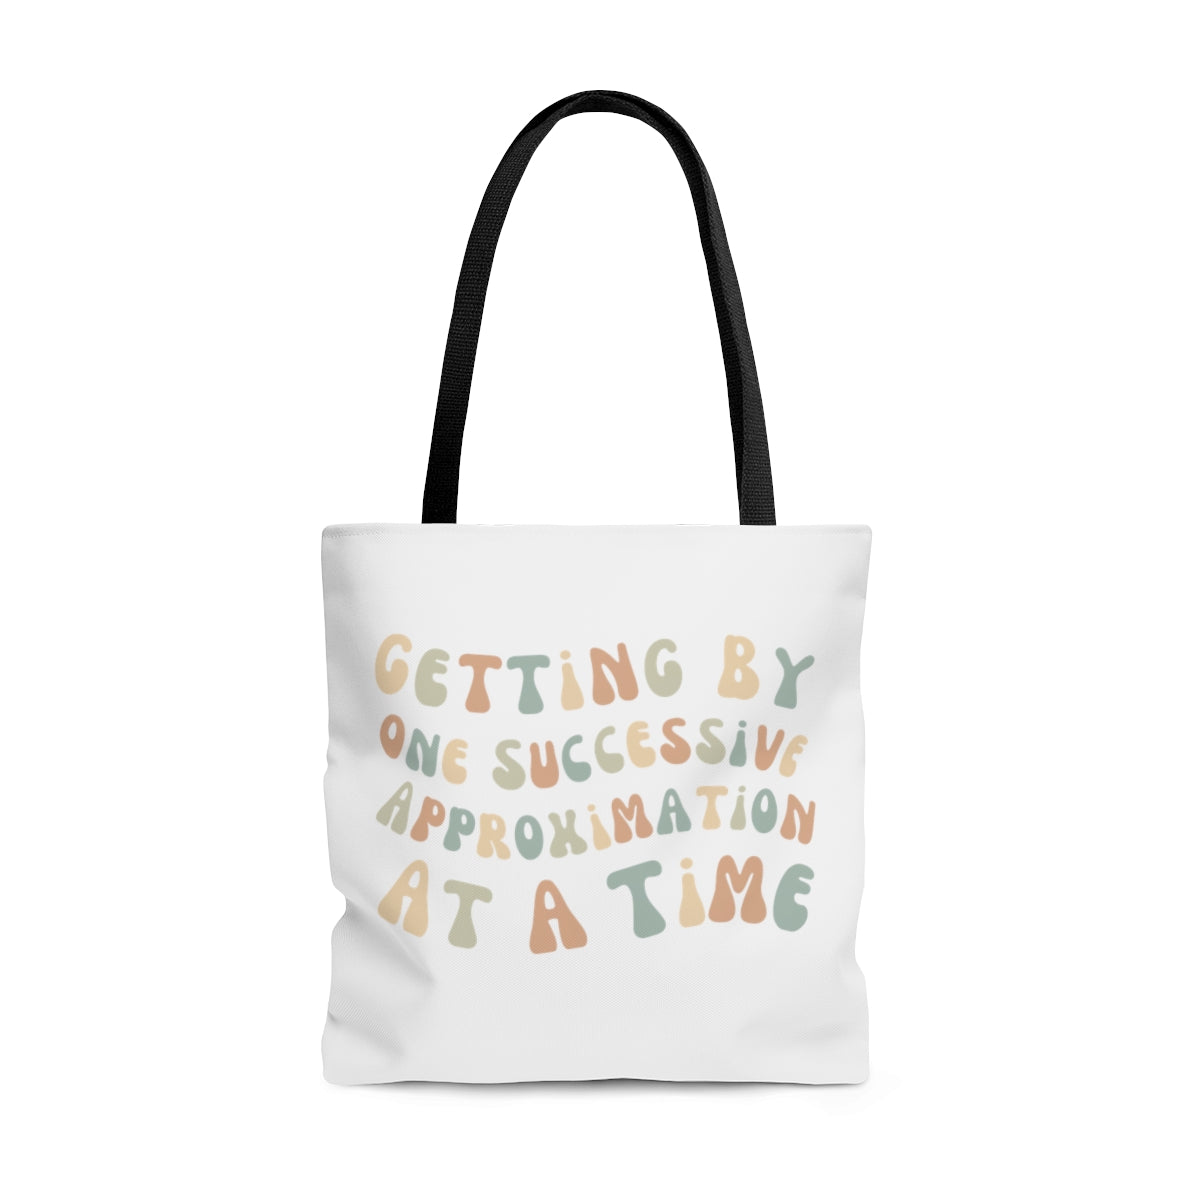 Getting by One Successive Approximation Tote Bag | Behavior analysis tote bag | Behavior Analyst